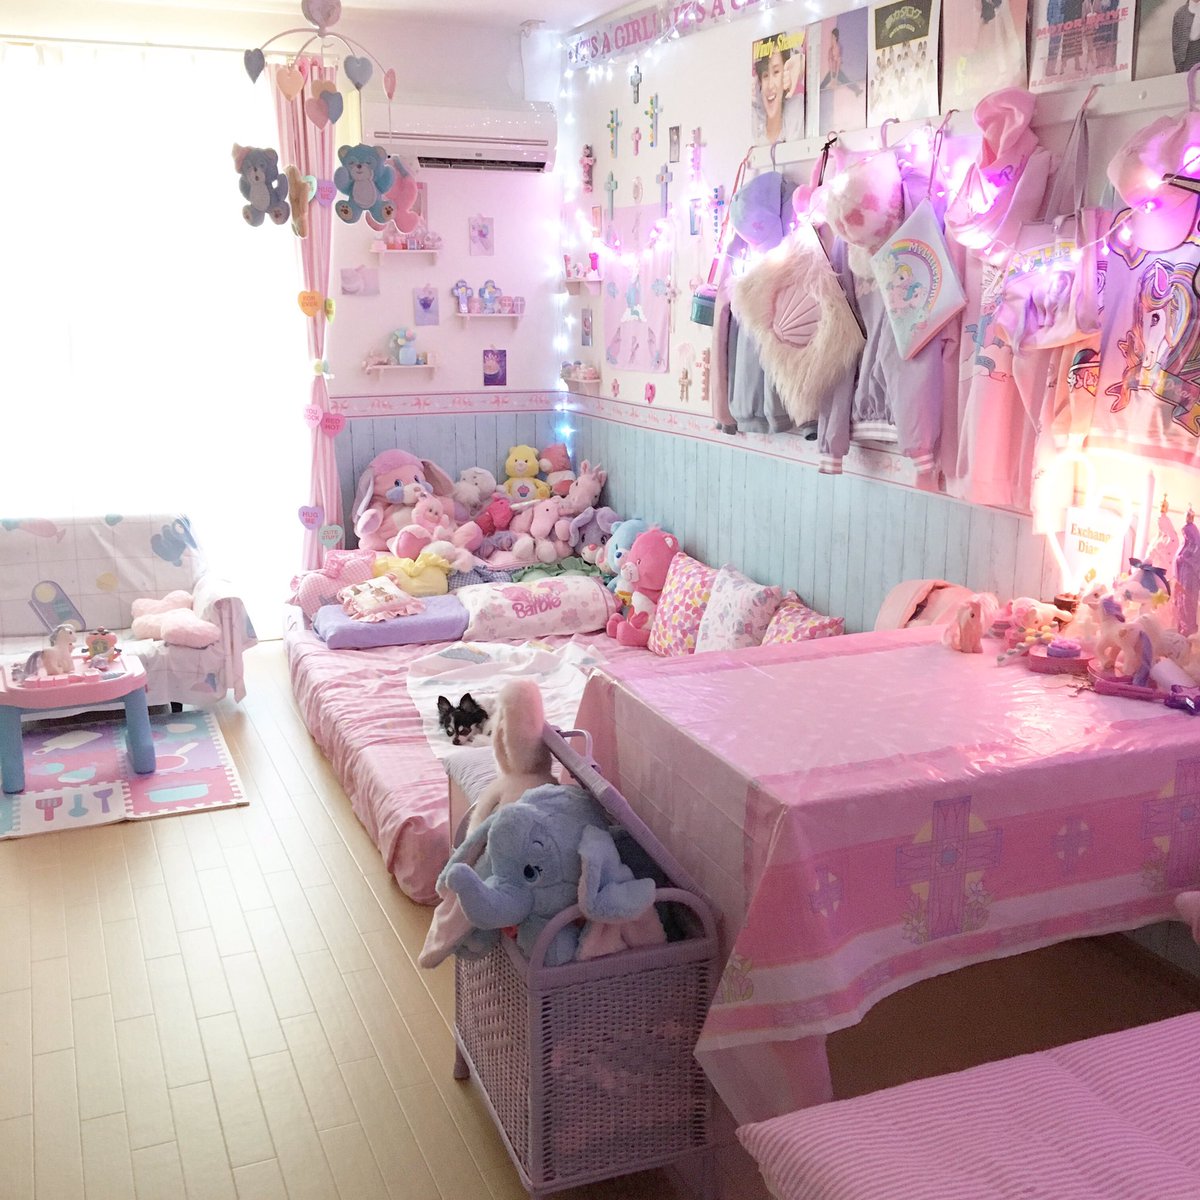 solarsherbet: Lets talk about Cute Bedrooms!